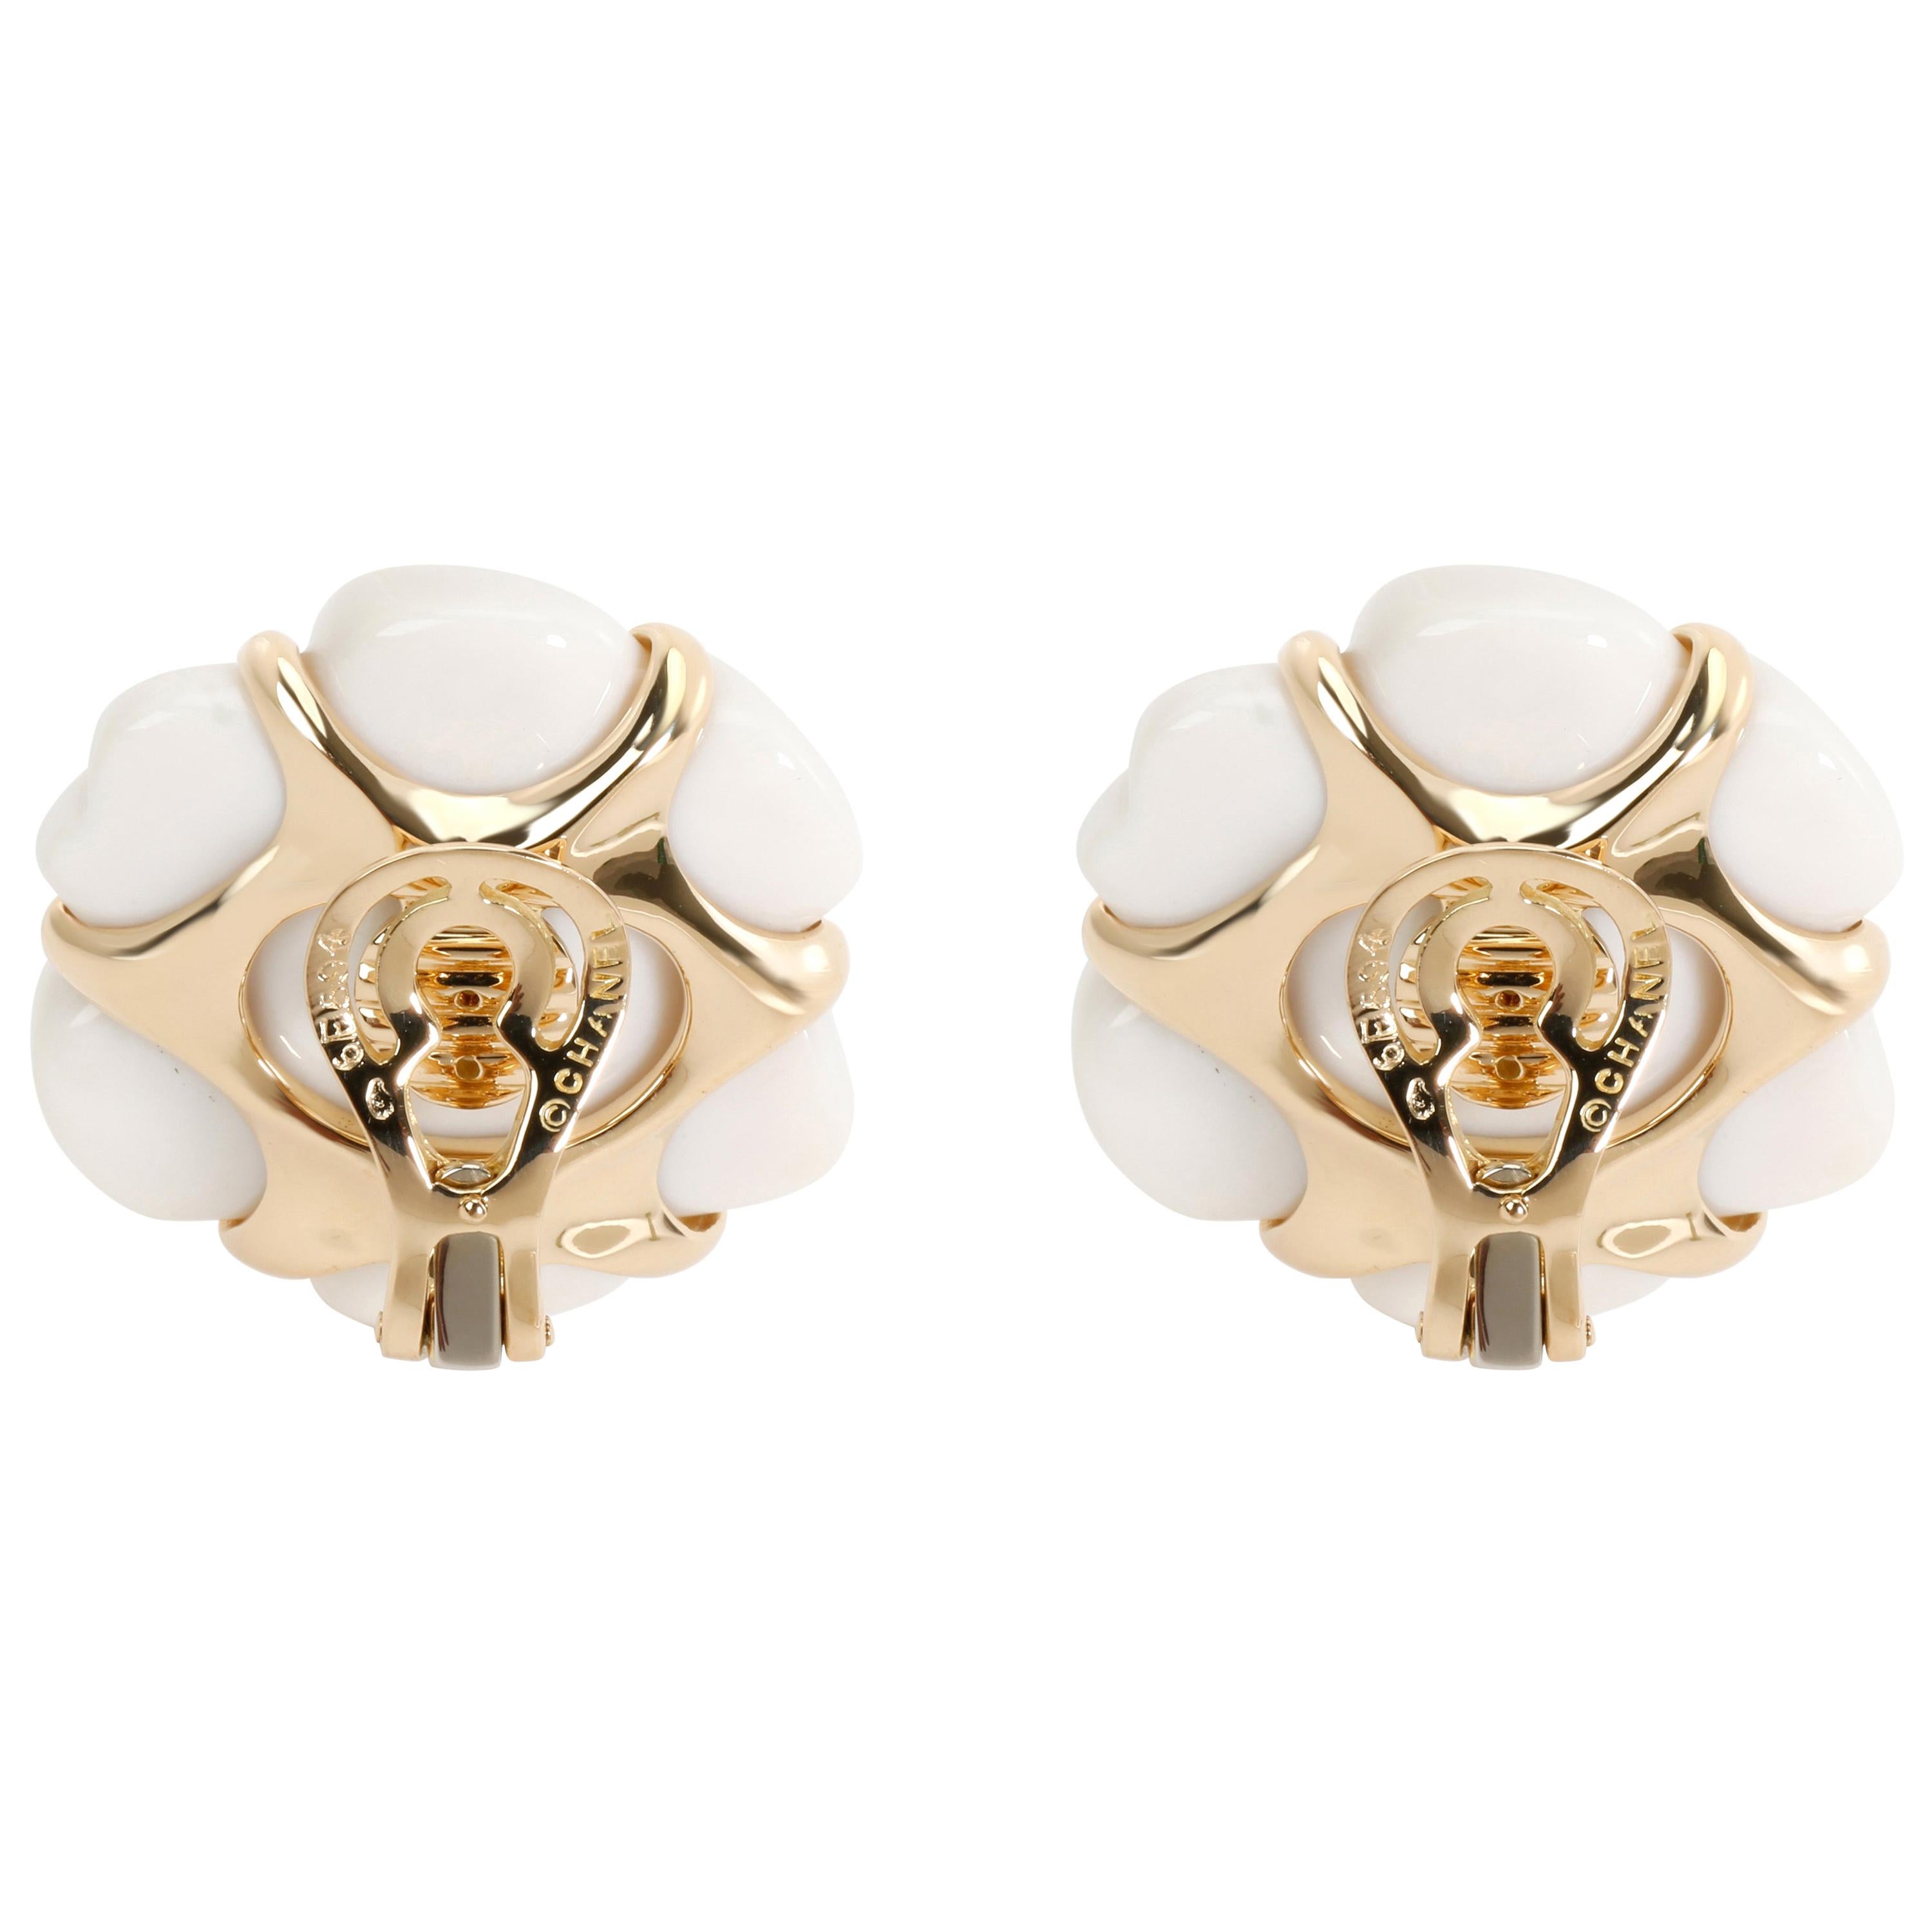 Chanel Camelia White Agate Flower Earrings in 18K Yellow Gold

PRIMARY DETAILS
SKU: 097993
Listing Title: Chanel Camelia White Agate Flower Earrings in 18K Yellow Gold
Condition Description: Retails for 6800 USD. In excellent condition. Clip On